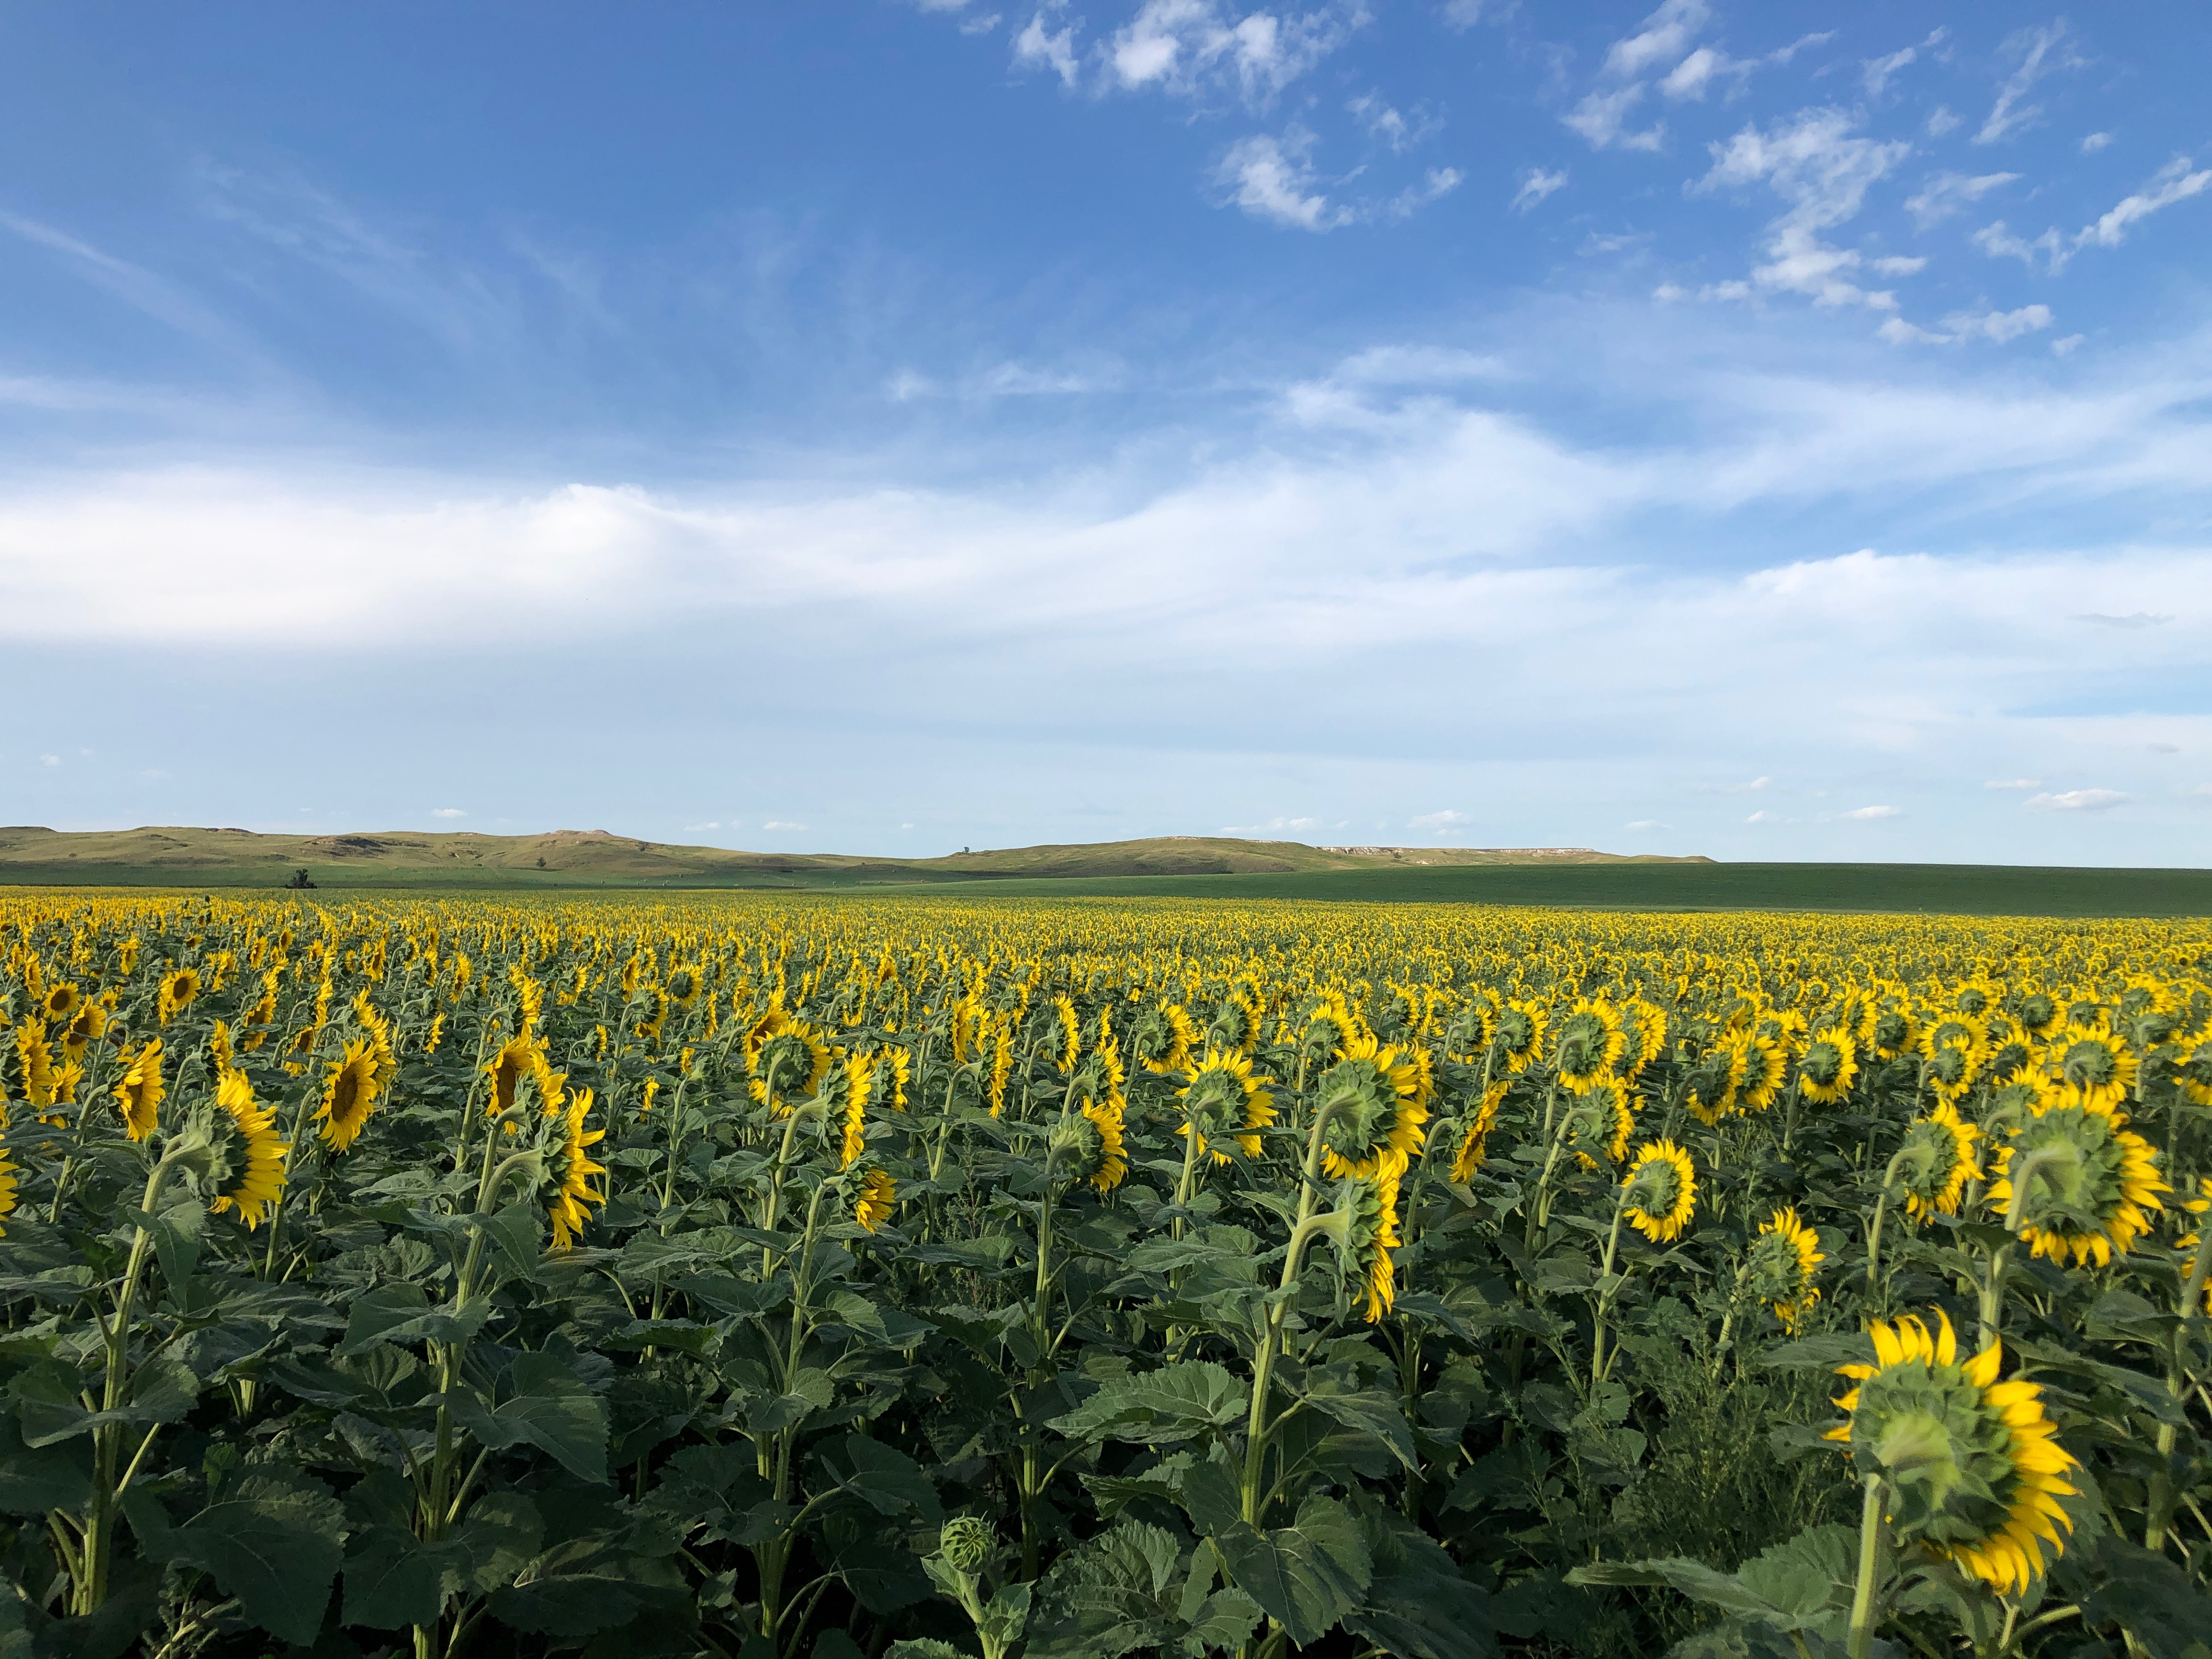 Morning Ag News, September 30, 2021: Changes to crop insurance could be on the way for sunflower growers